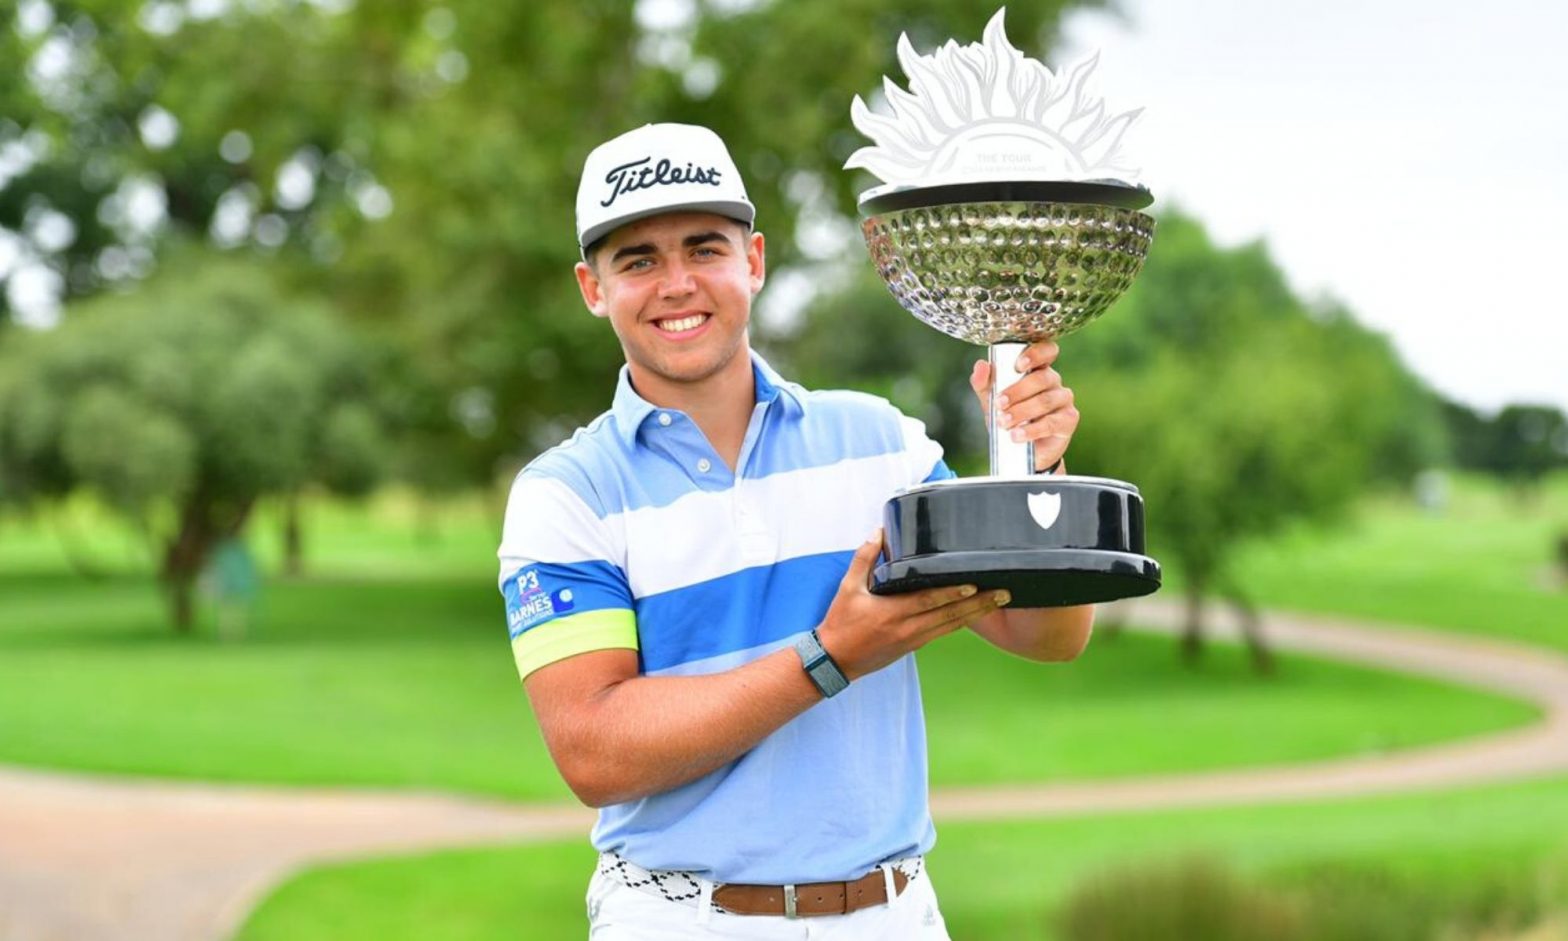 Double delight for Higgo as he claims Tour Championship